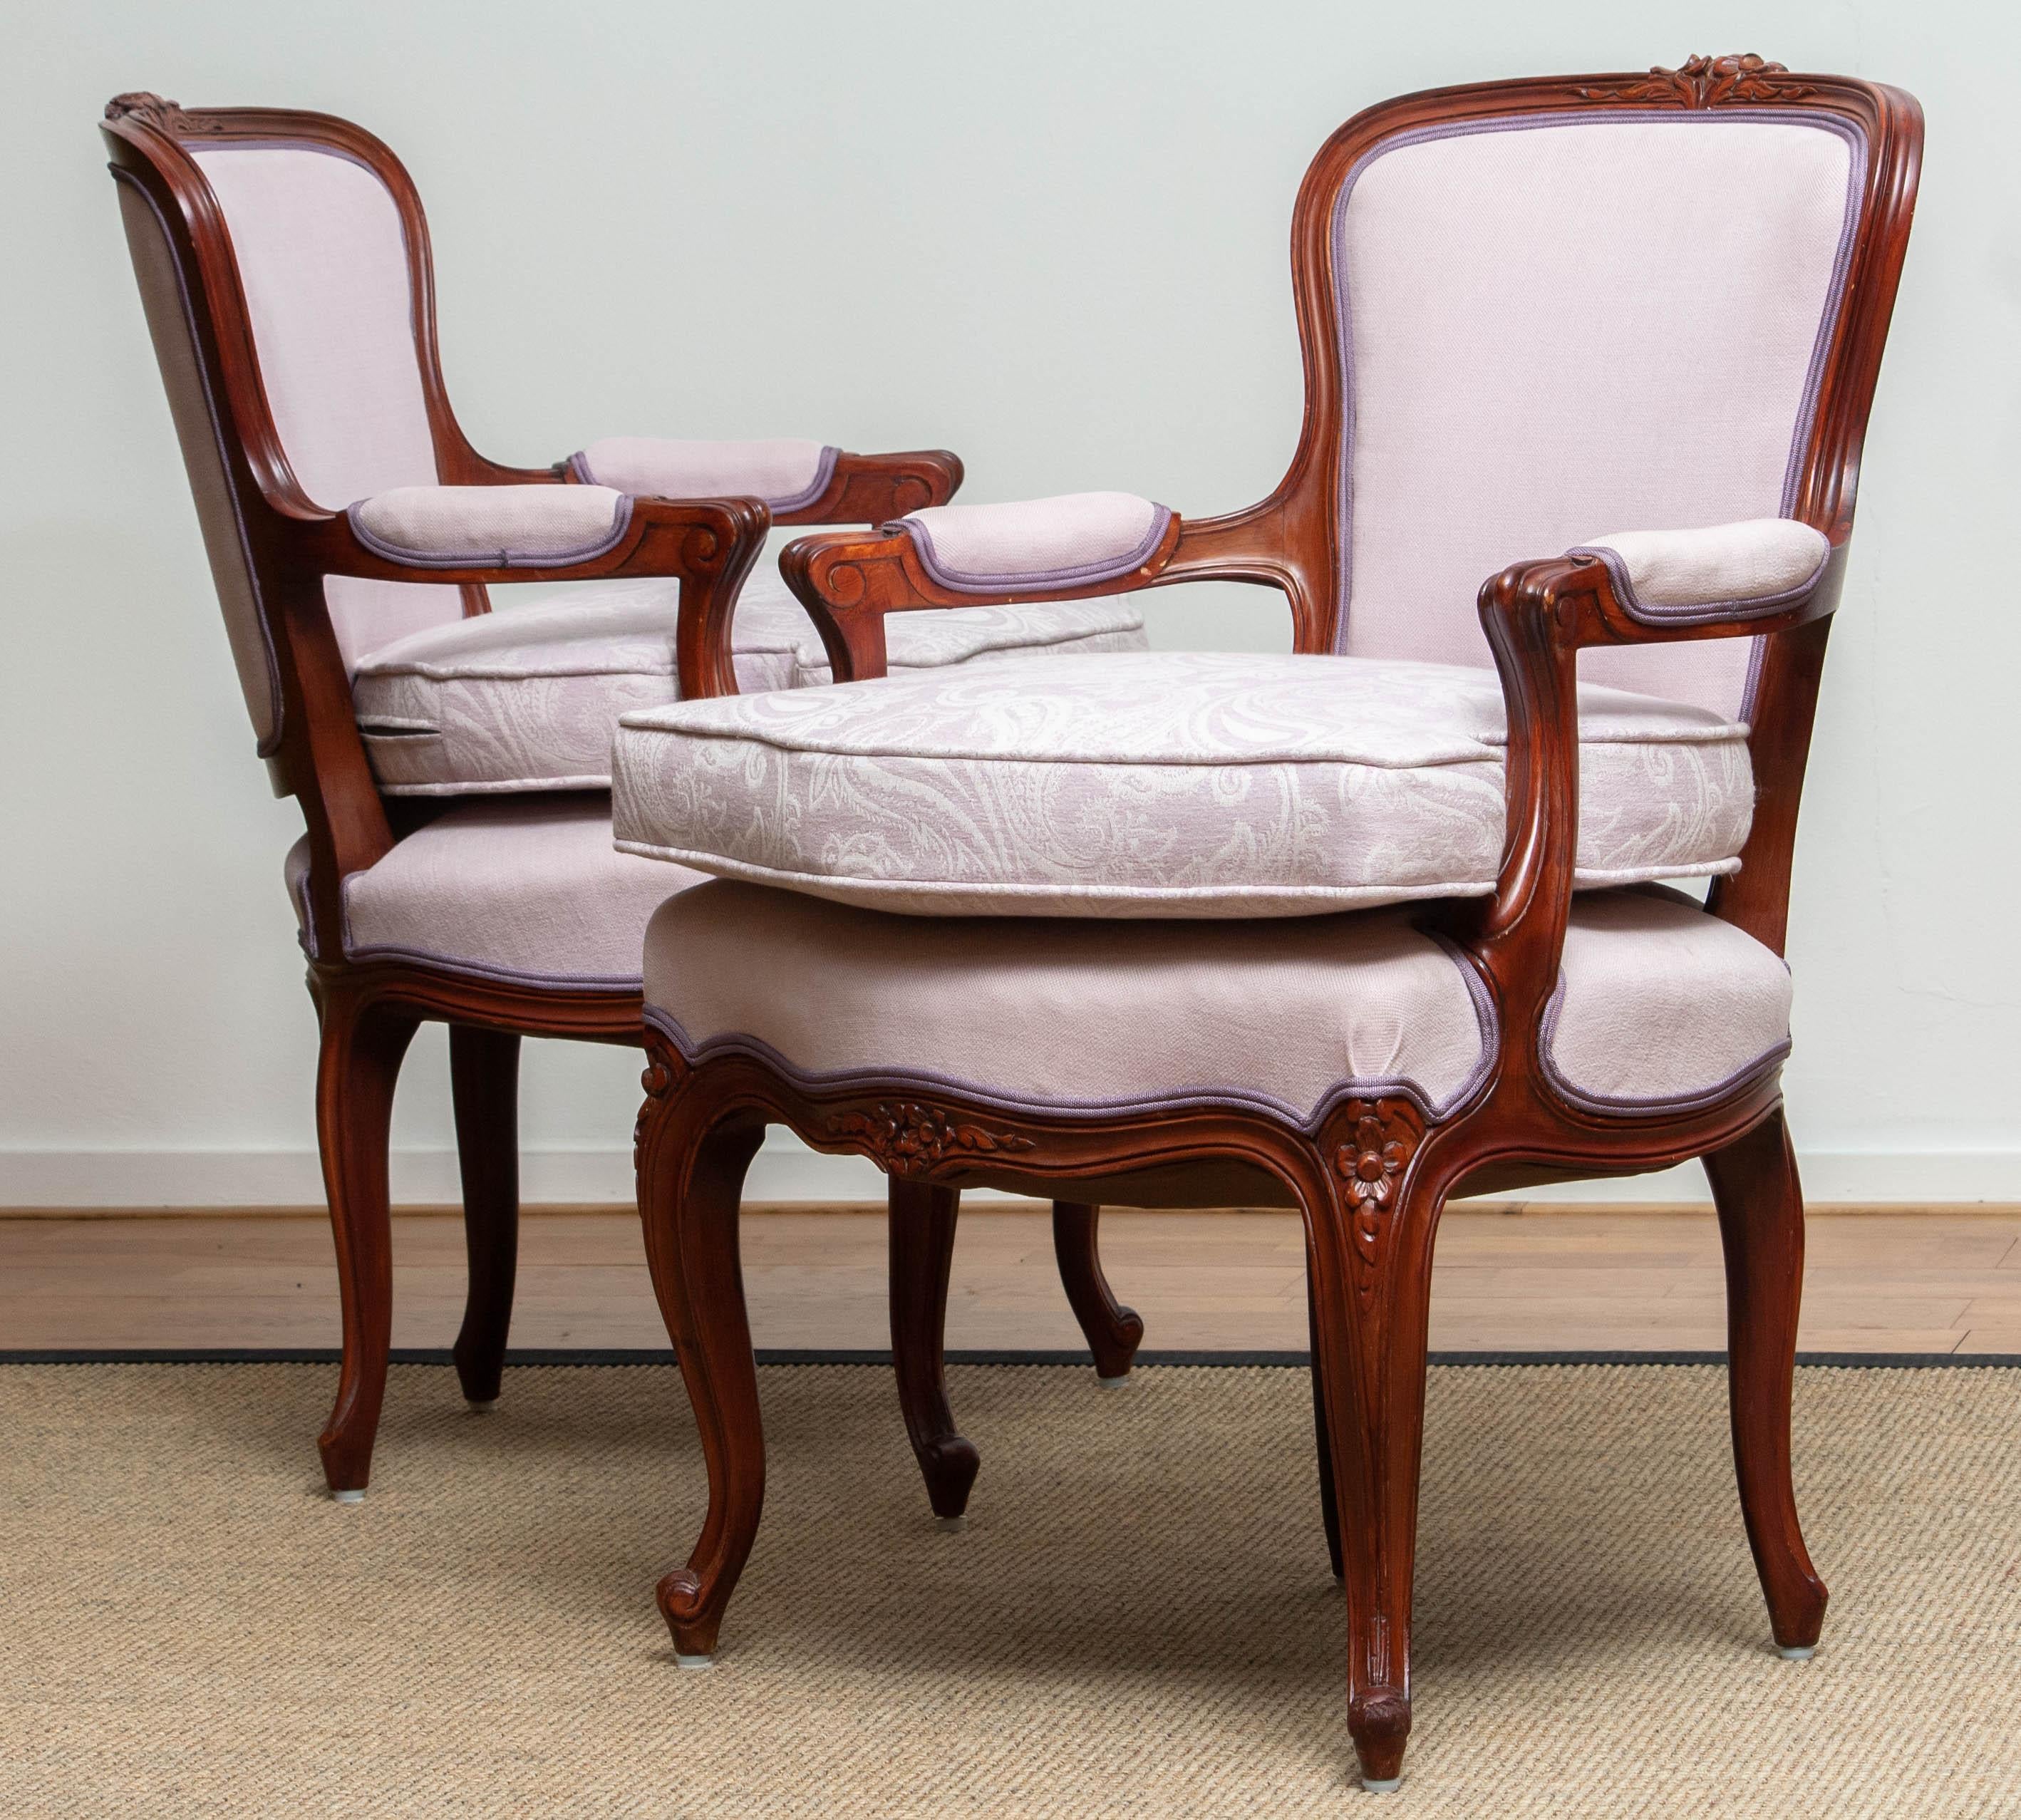 Mid-20th Century 1950 Pair of Pink Swedish Rococo Bergères in the Shabby Chic Technique Chairs F